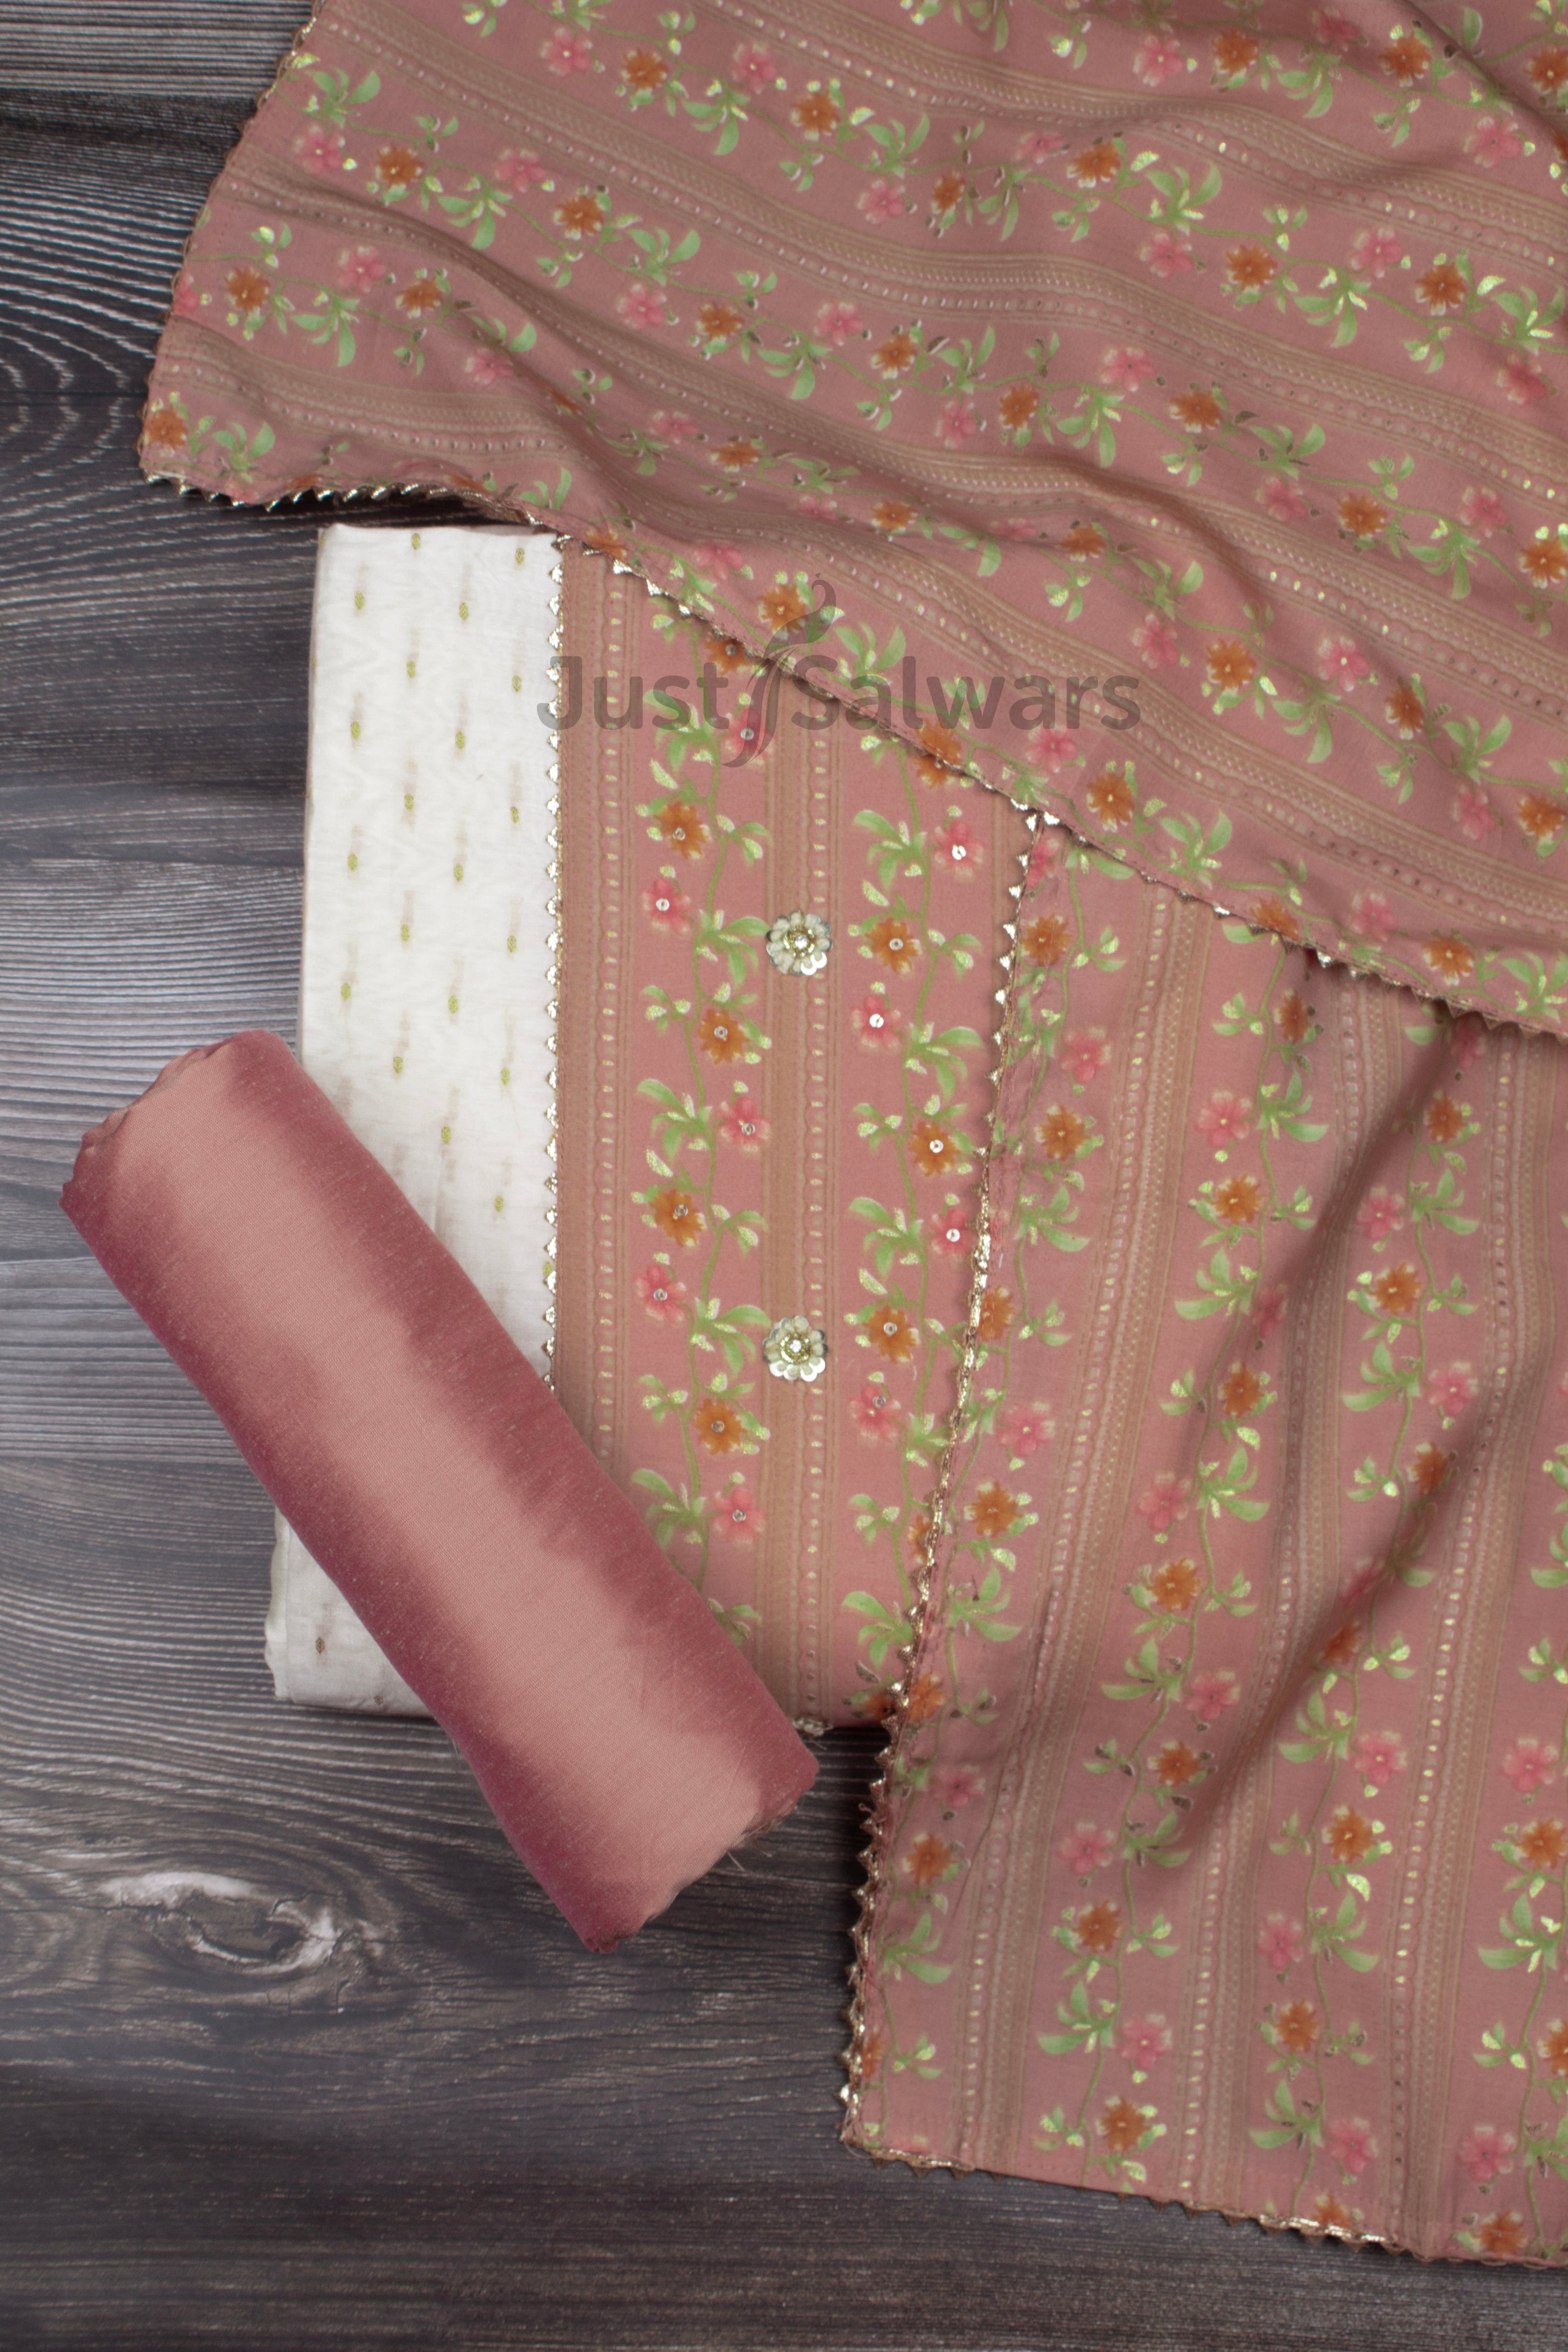 Cream and Peach Colour Silk Cotton Unstitched Dress Material -Dress Material- Just Salwars